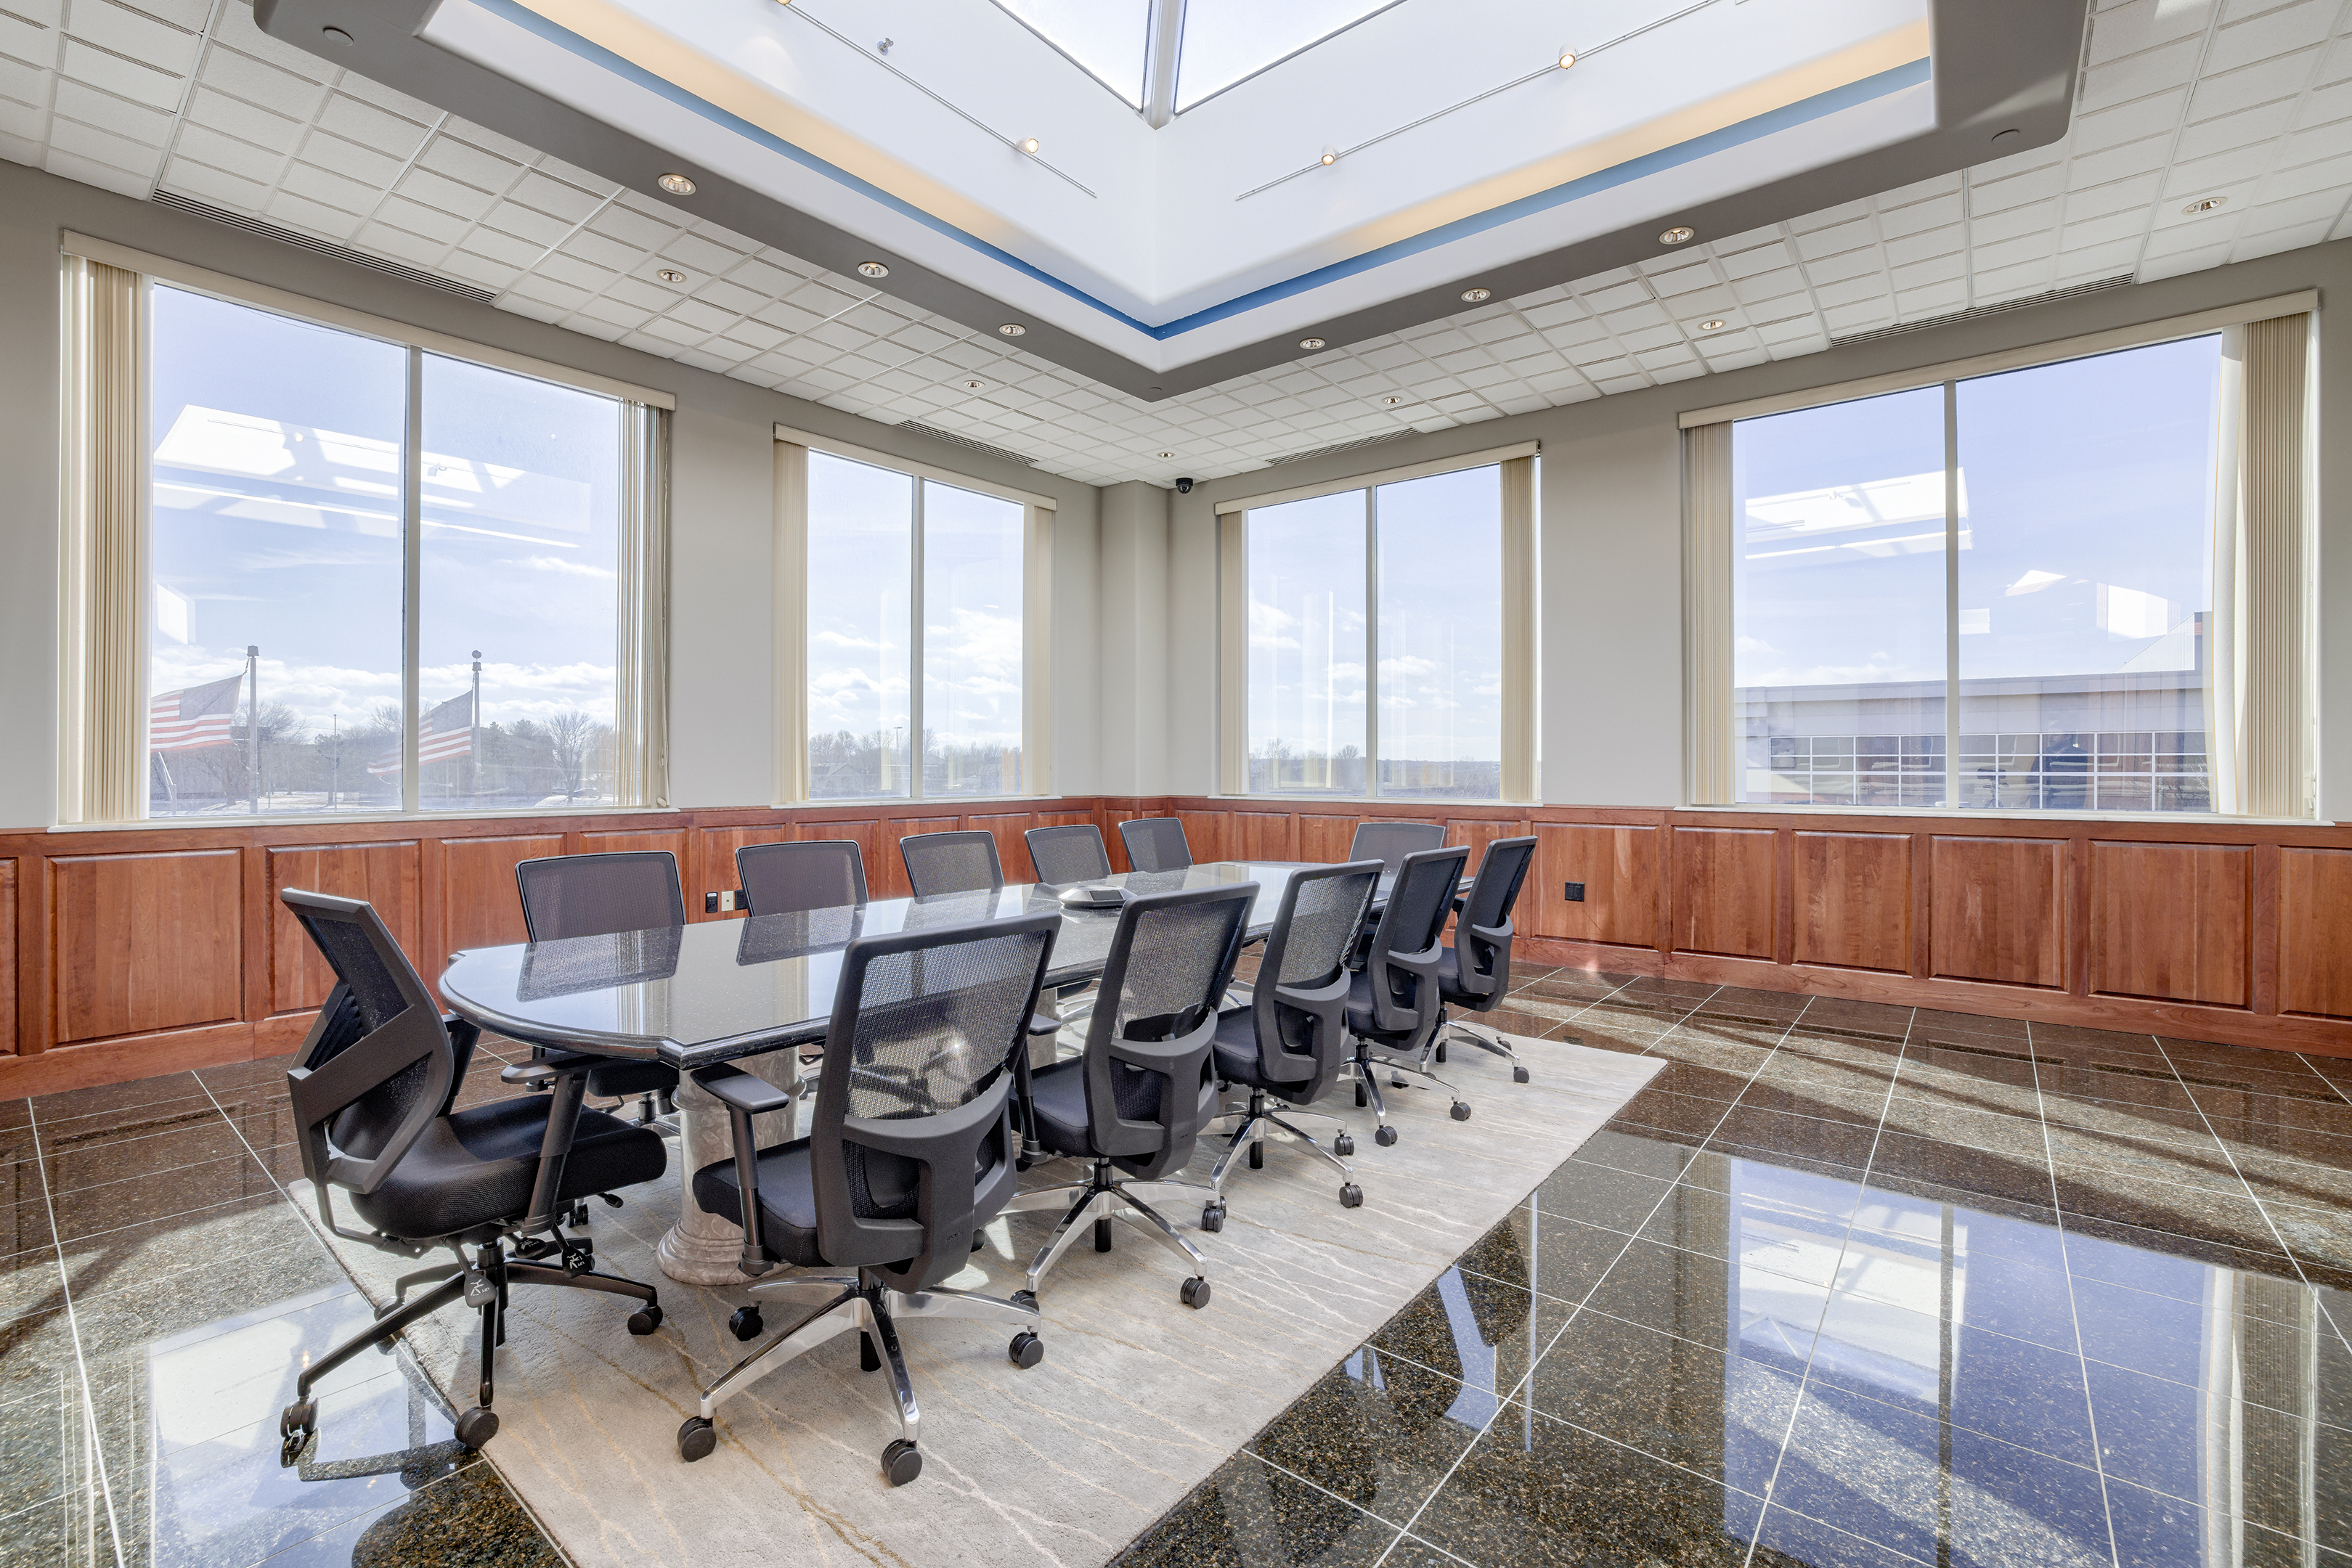 A sample conference room configuration within an available office space for lease in the Millennium Plaza building.